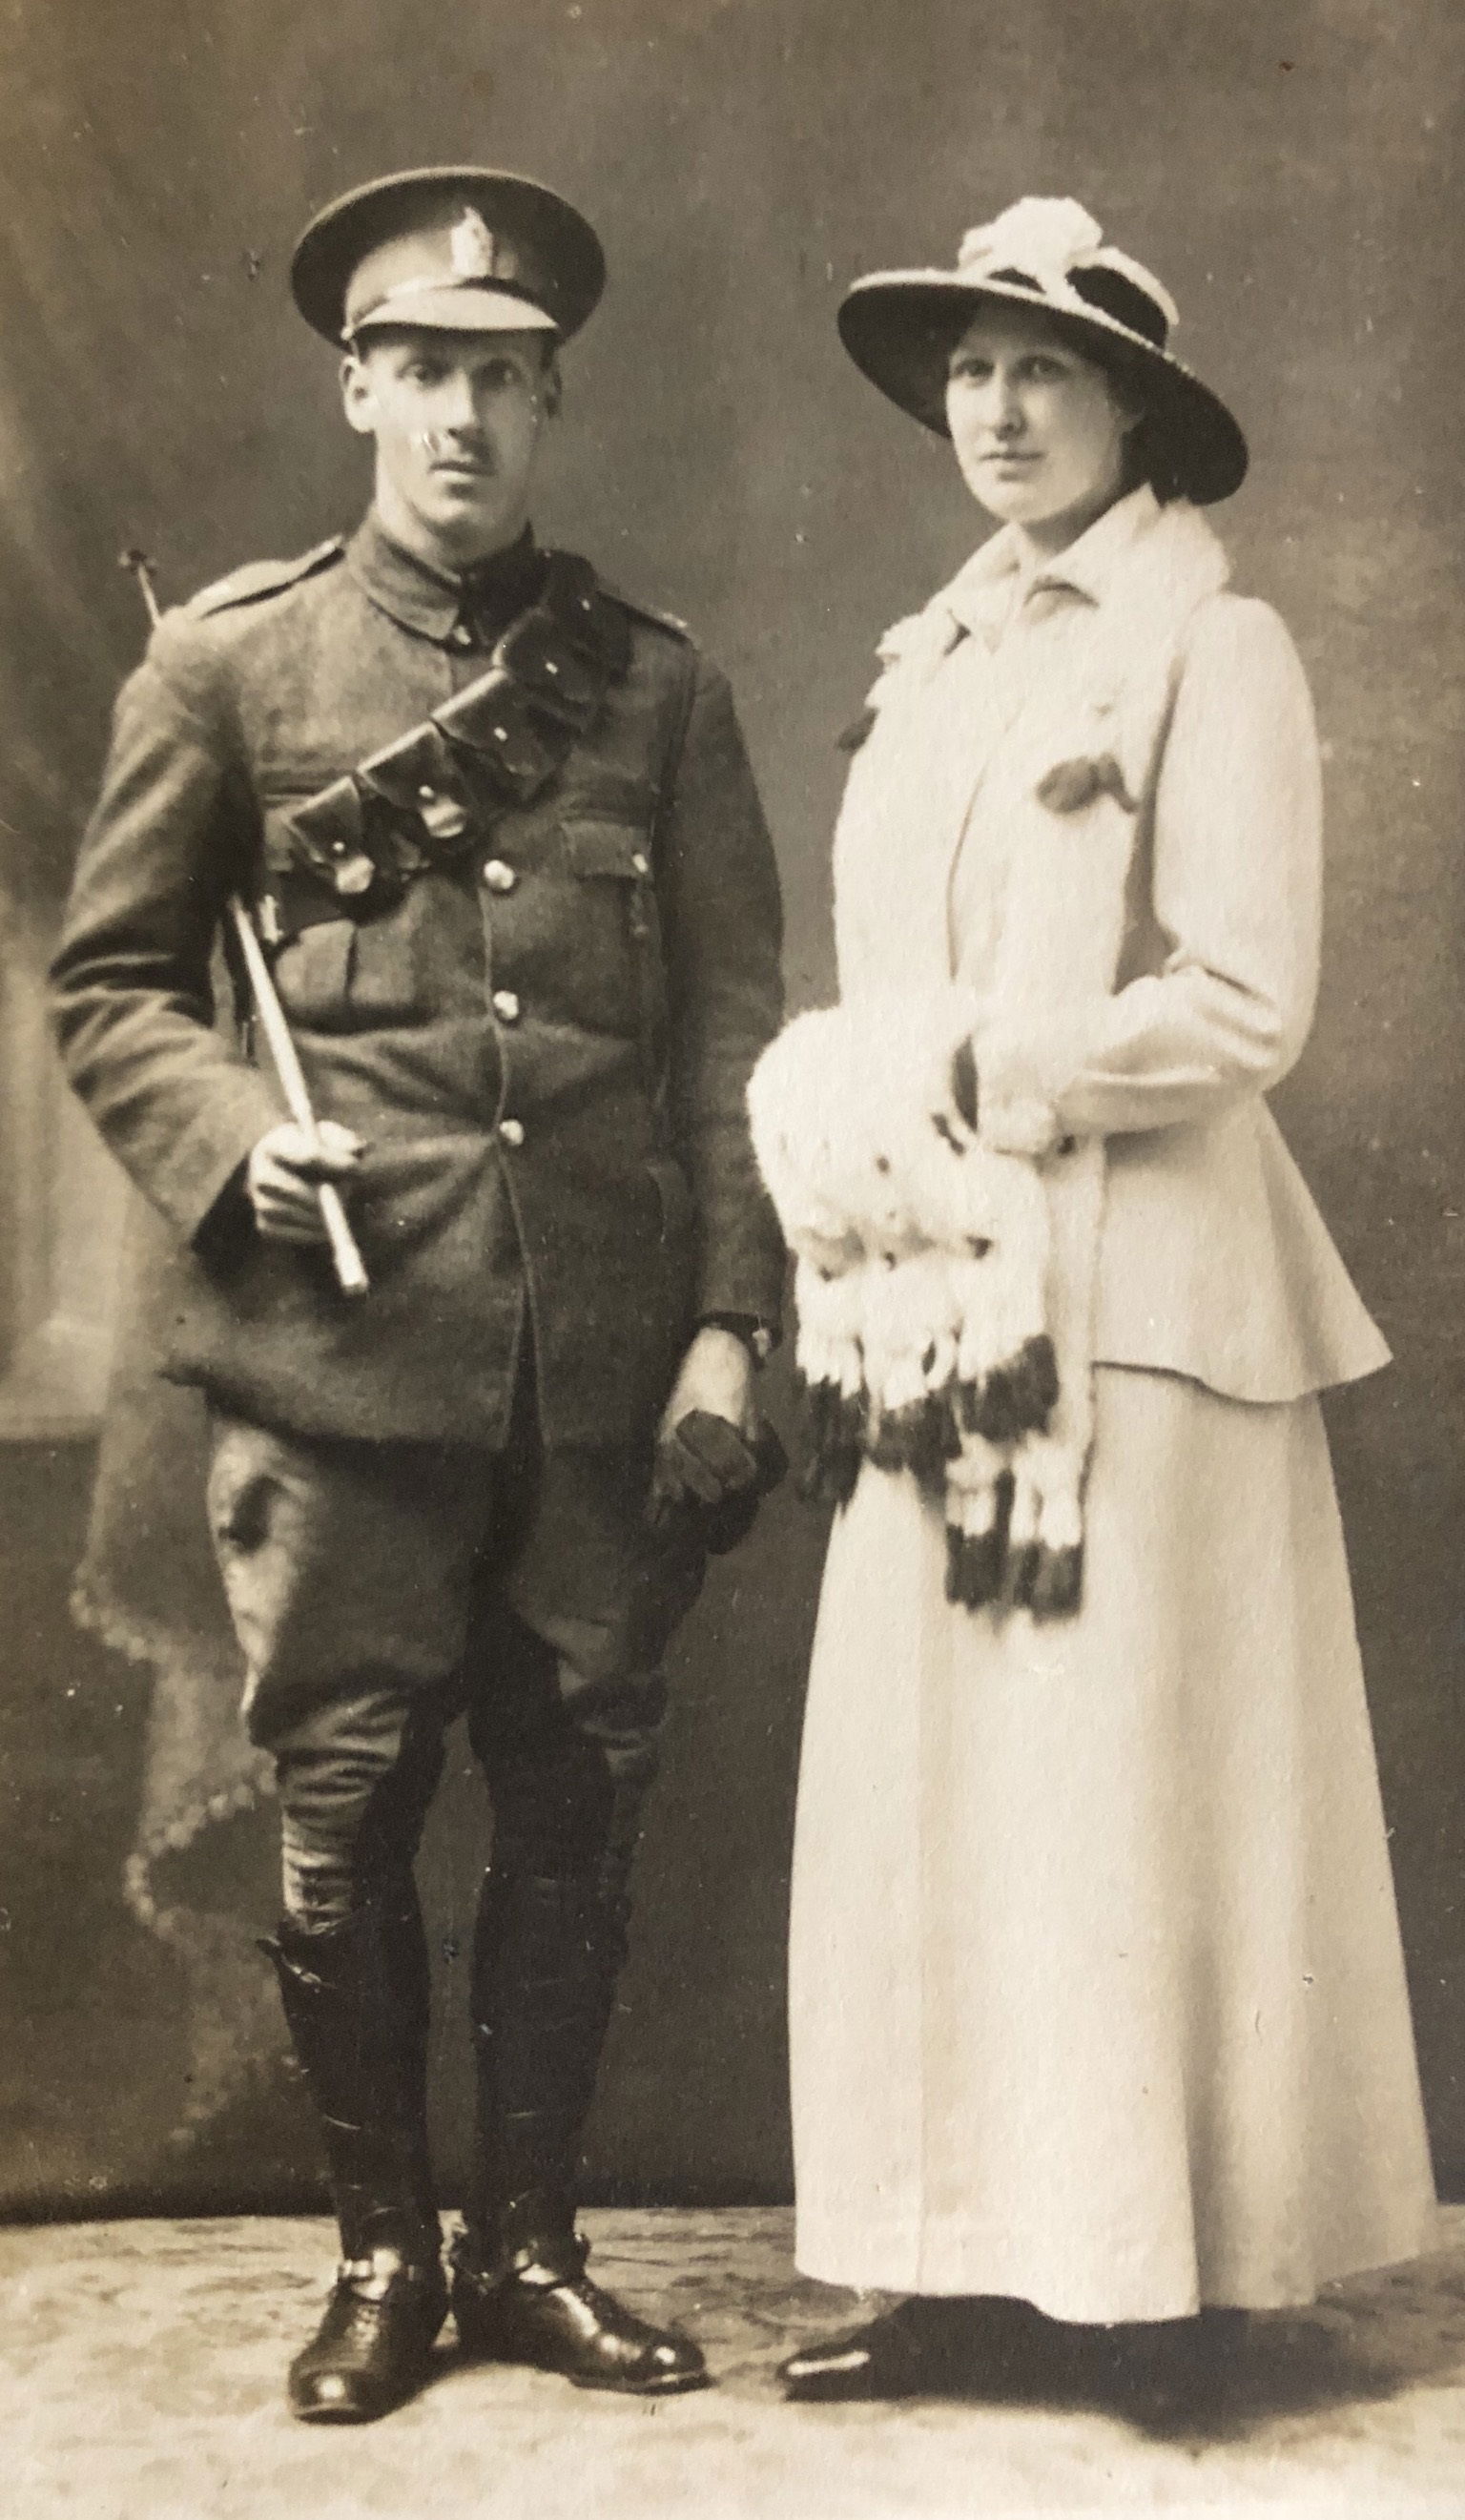 A Trooper of King Edward’s Horse in Service Dress uniform with his partner circa 1914 with 1903-pattern, Mounted Infantry leather 50 round .303 bandolier and King Edward’s Horse Regimental headdress badge.